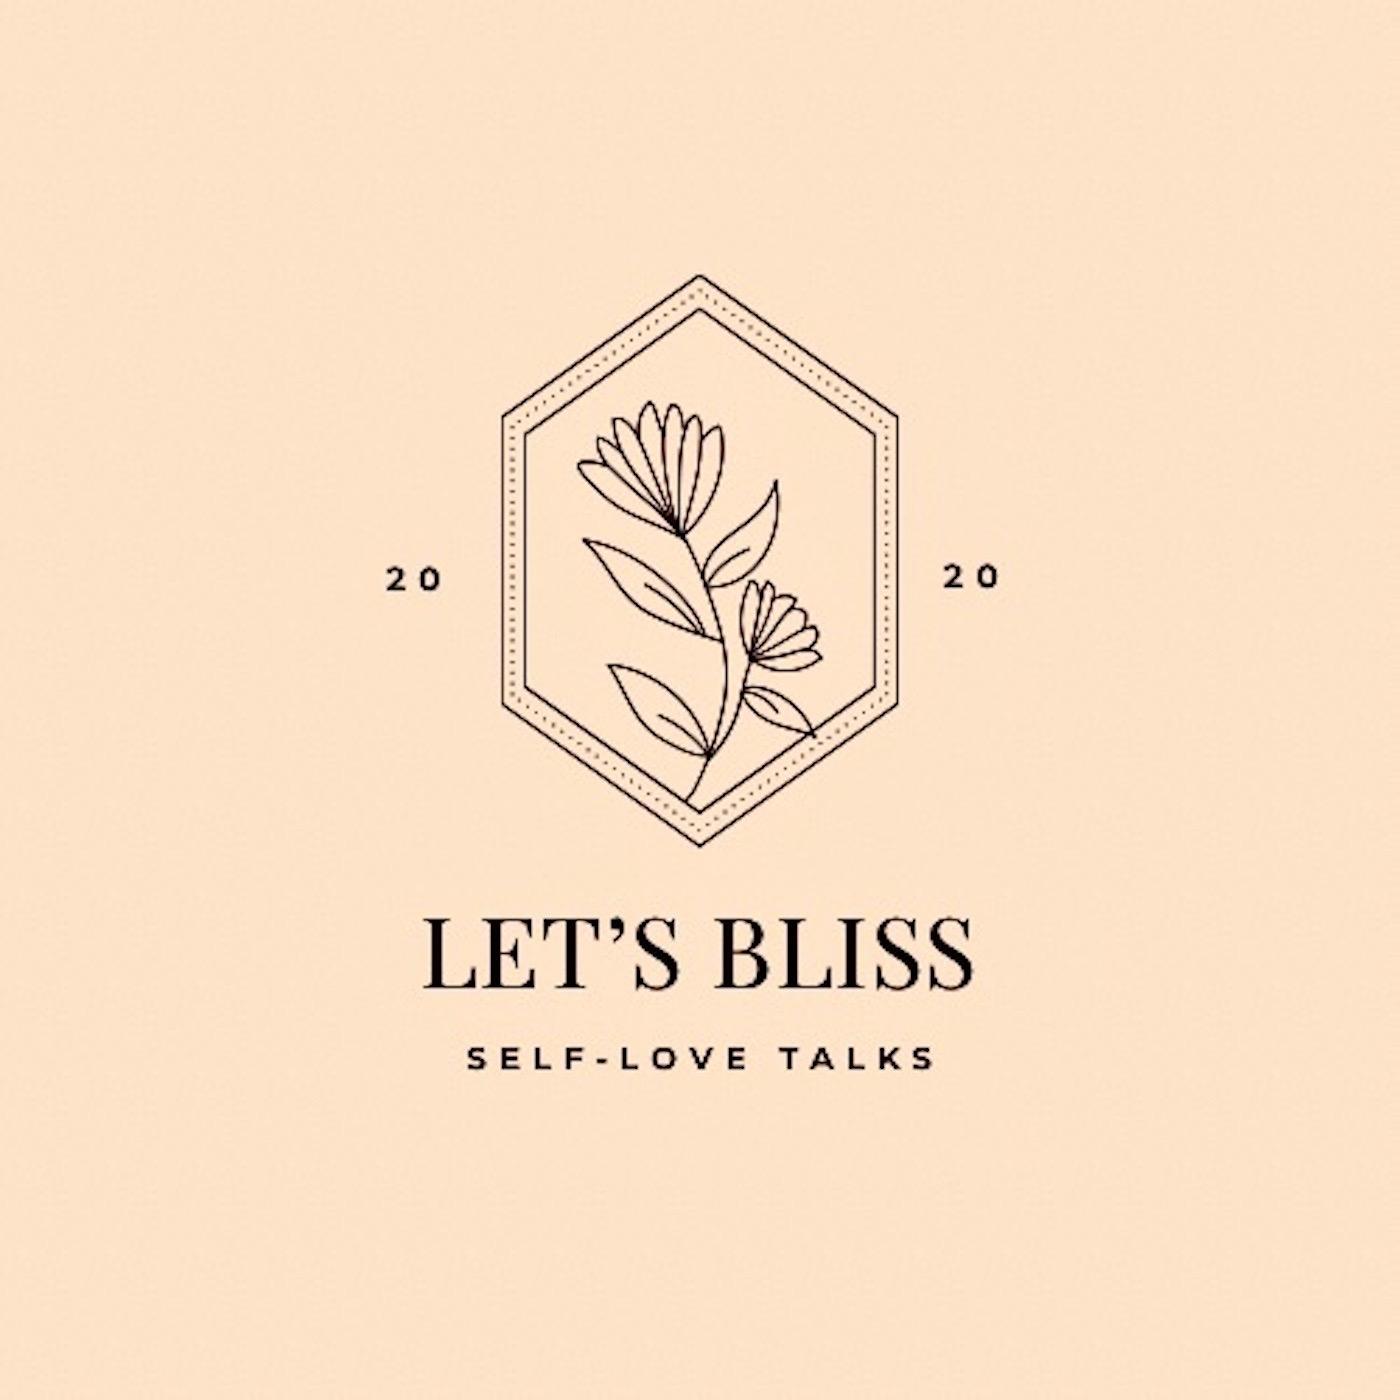 Let's Bliss